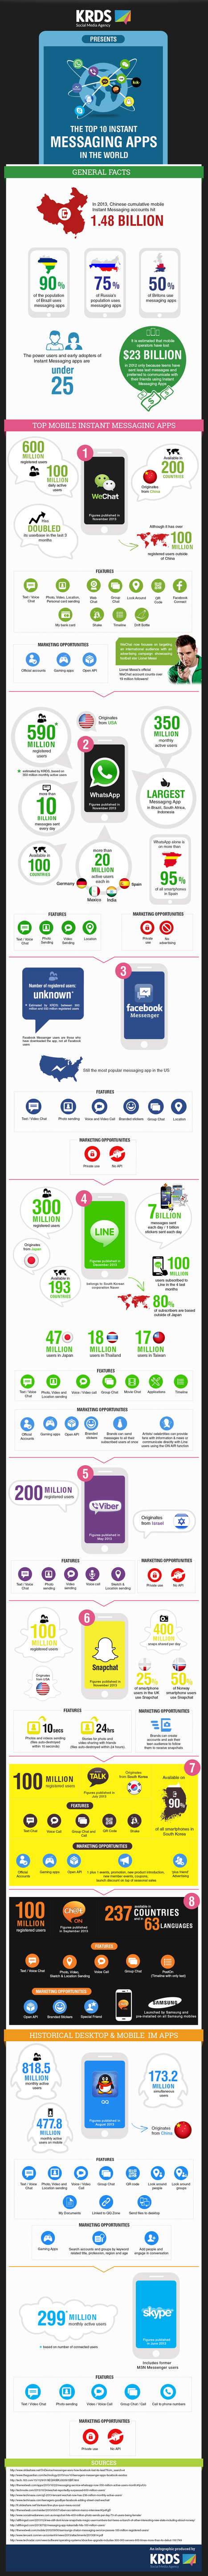 Infographic: the Top 10 Instant Messaging Apps in the world, by KRDS | Education & Numérique | Scoop.it